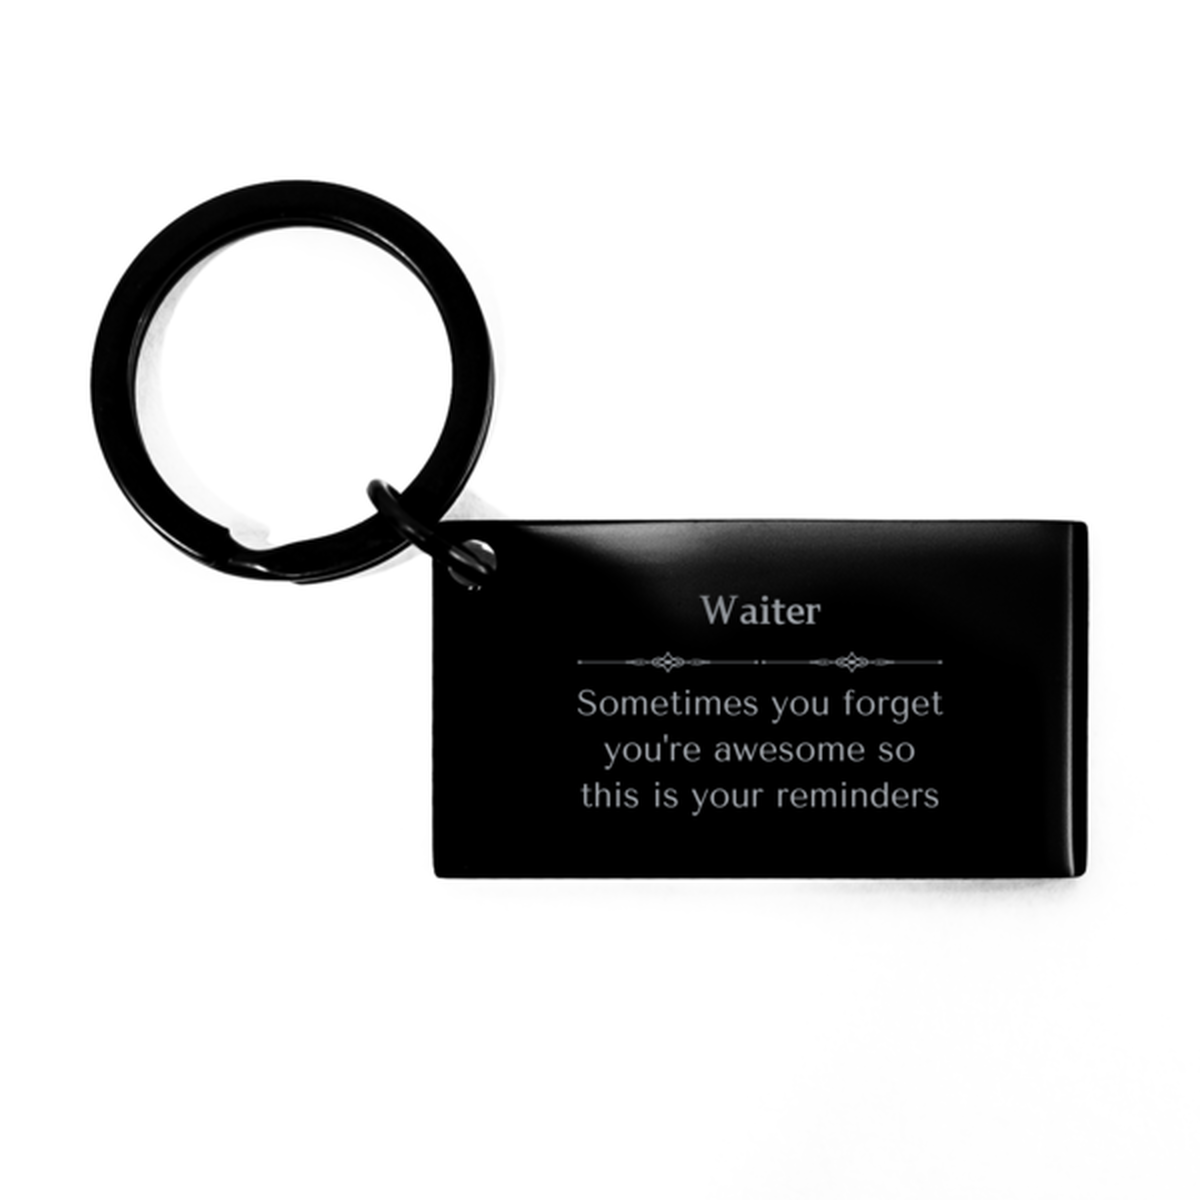 Sentimental Waiter Keychain, Anesthesiologist Sometimes you forget you're awesome so this is your reminders, Graduation Christmas Birthday Gifts for Waiter, Men, Women, Coworkers